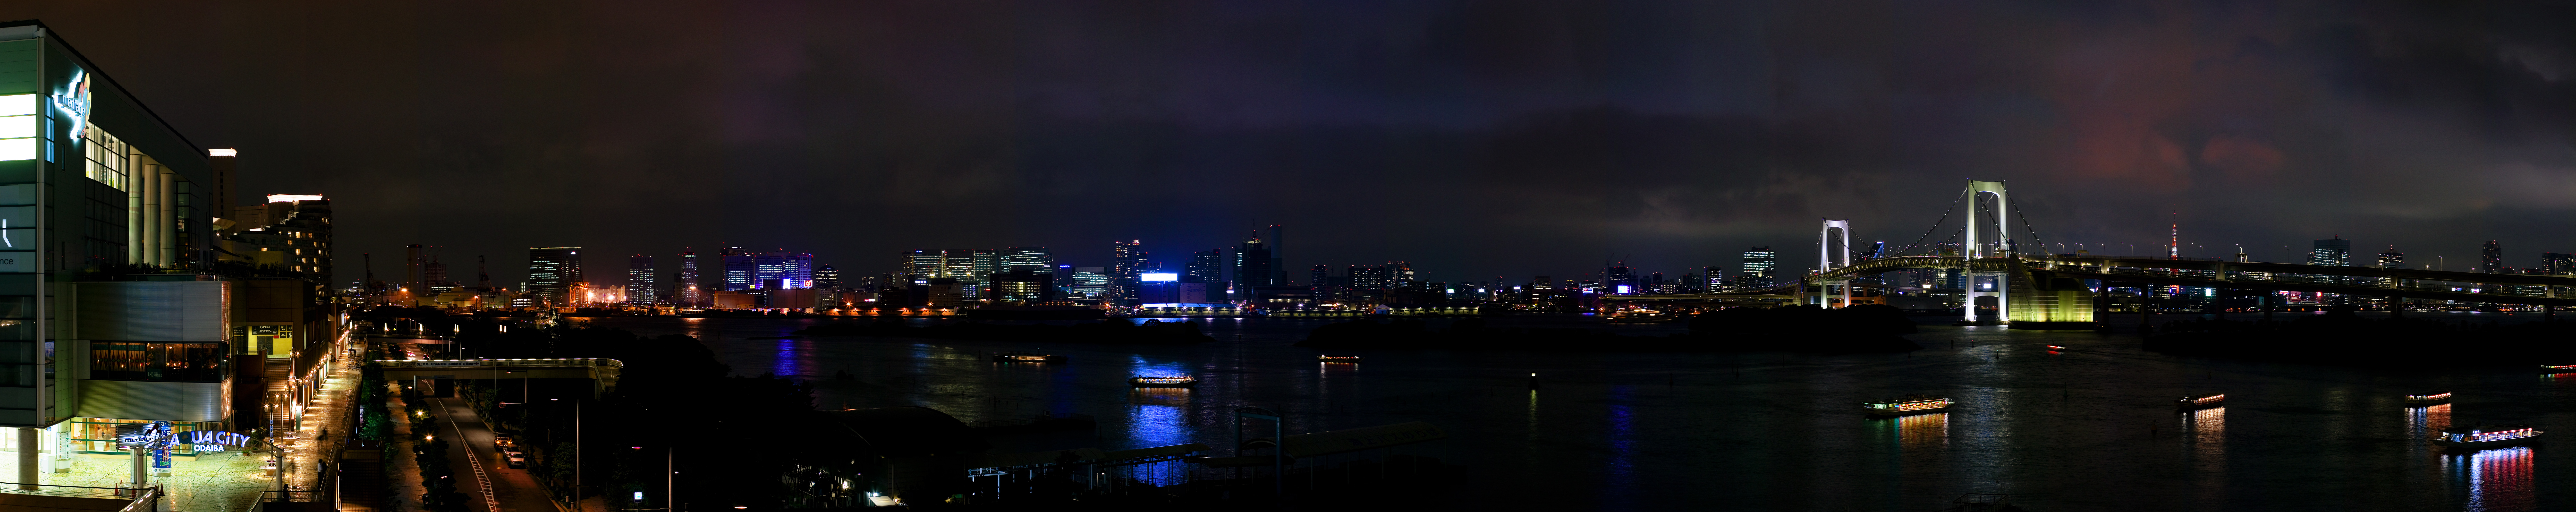 photo,material,free,landscape,picture,stock photo,Creative Commons,Tokyo night view from Odaiba, Rainbow Bridge, Tokyo Bay, pleasure boat, The seaside